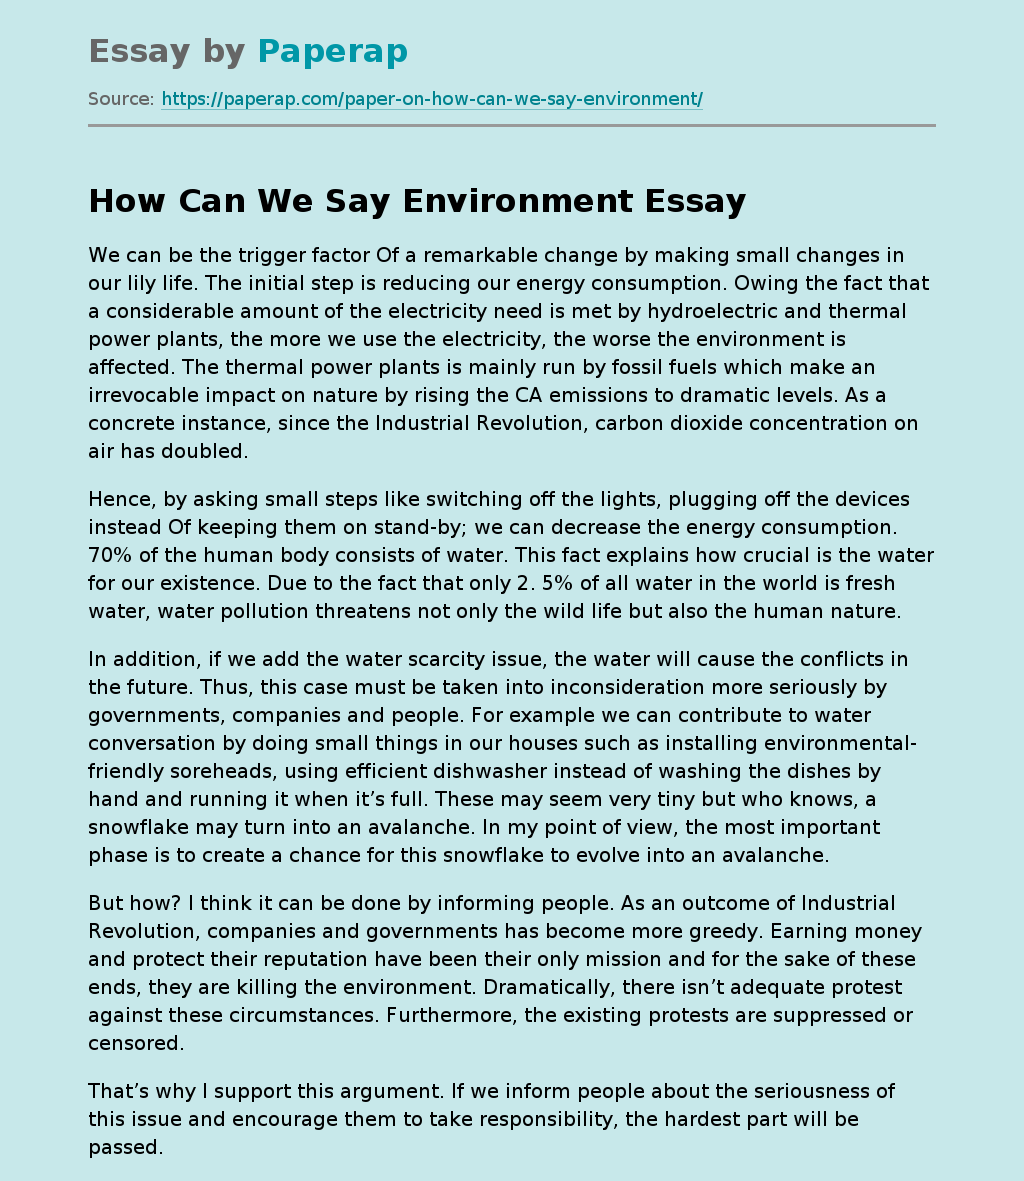 How Can We Say Environment